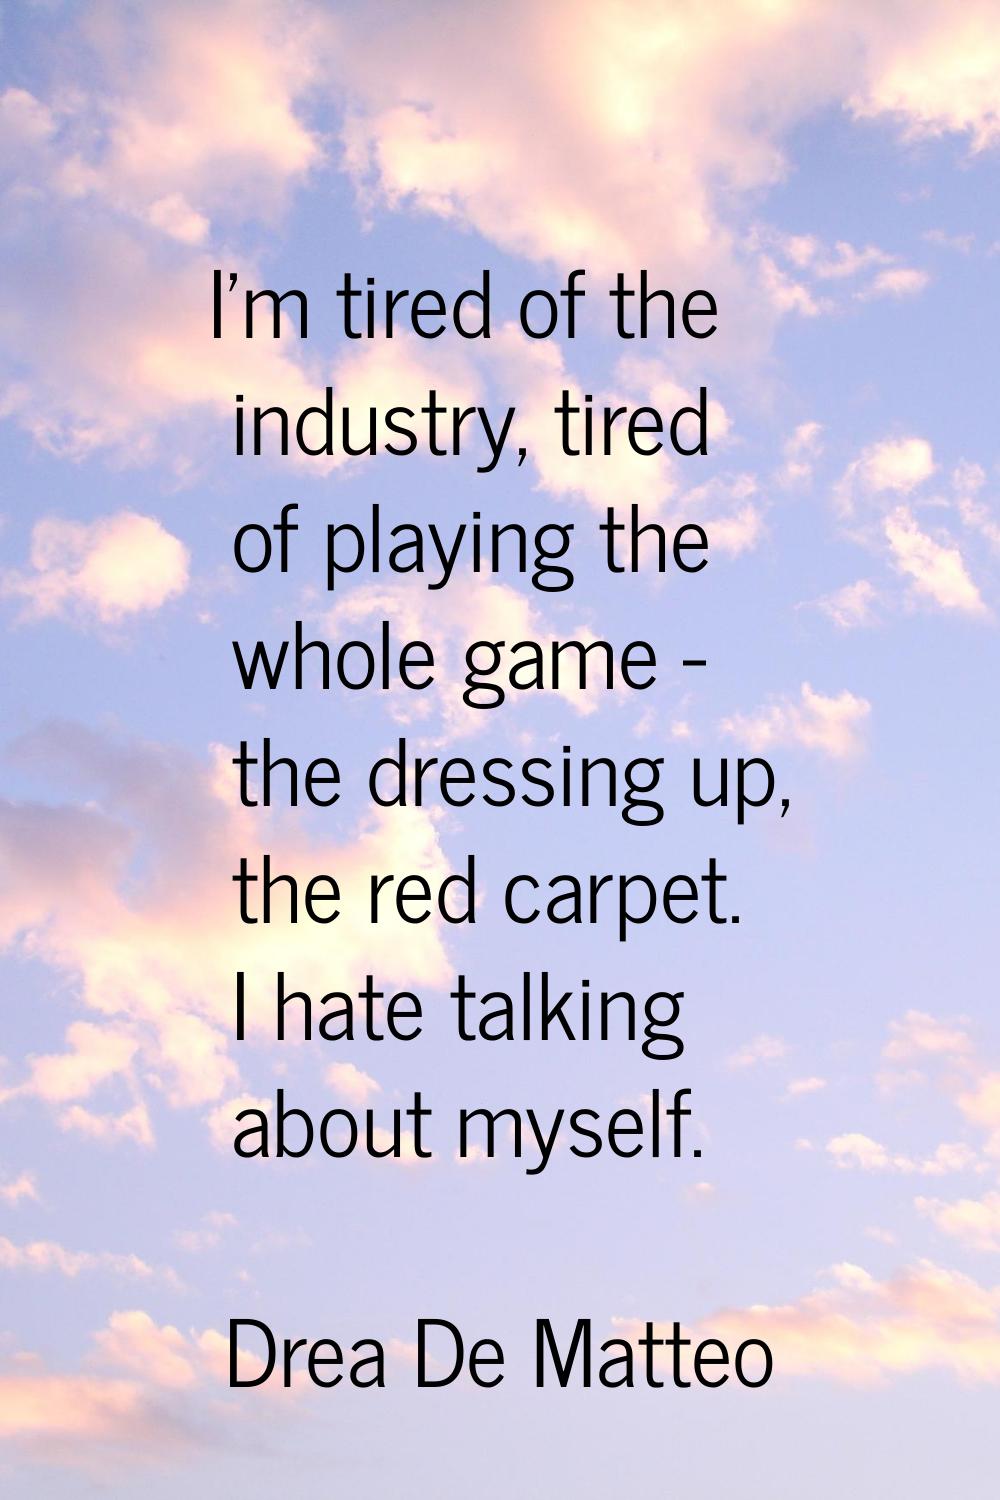 I'm tired of the industry, tired of playing the whole game - the dressing up, the red carpet. I hat